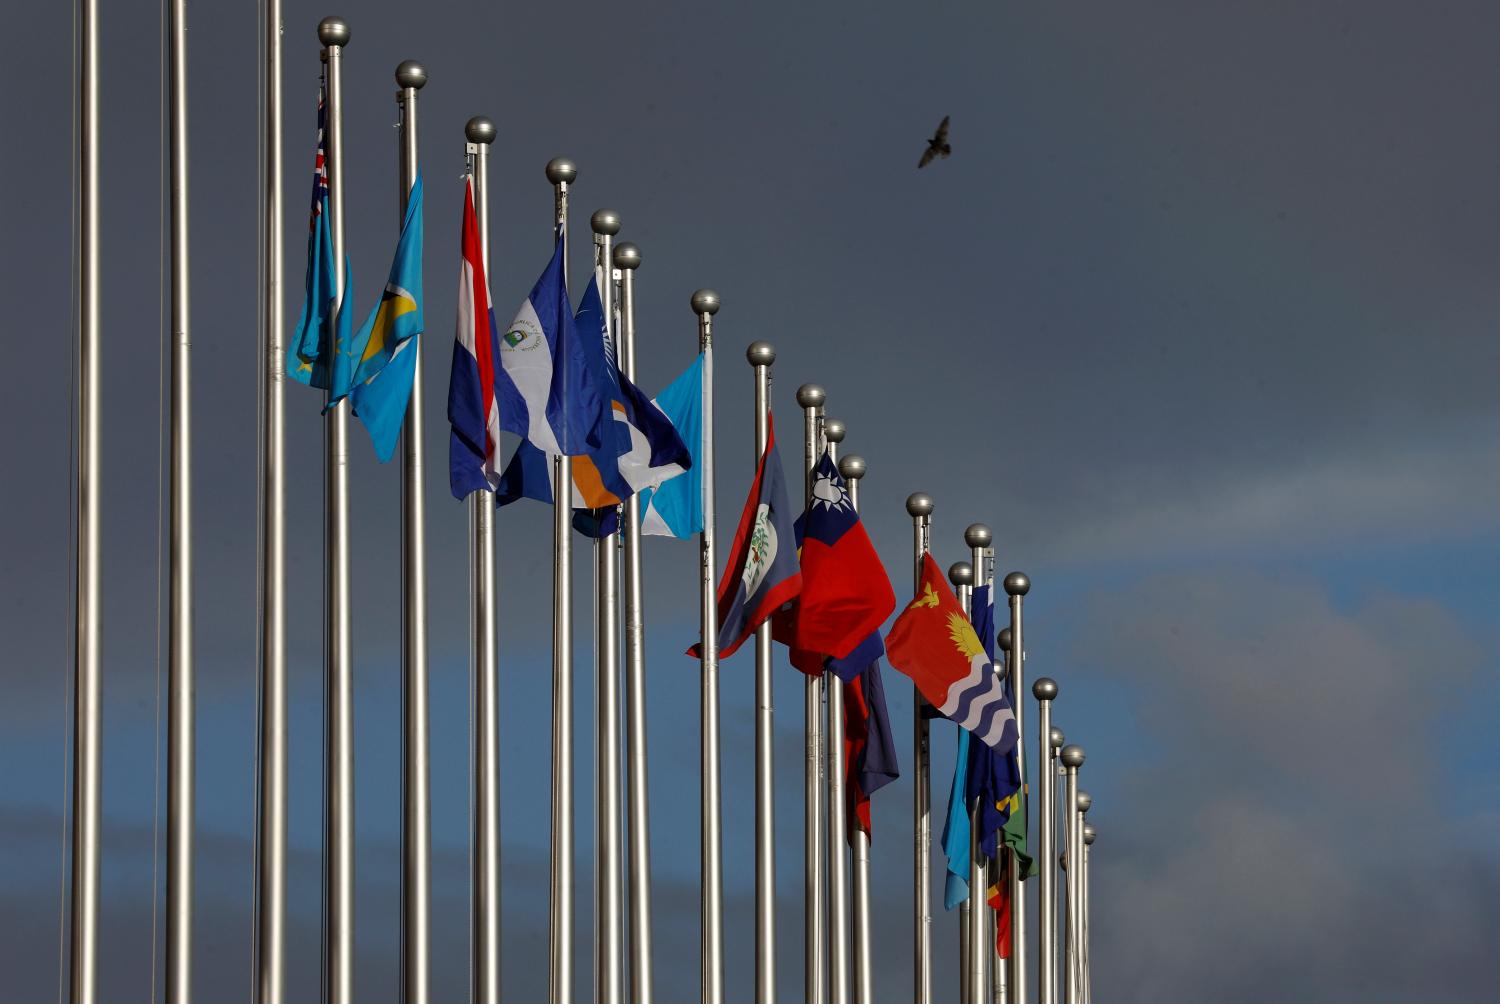 A bird flies around the flagpoles of the national flags inside the Diplomatic Quarter, where Taiwan ally embassies located, in Taipei, Taiwan.